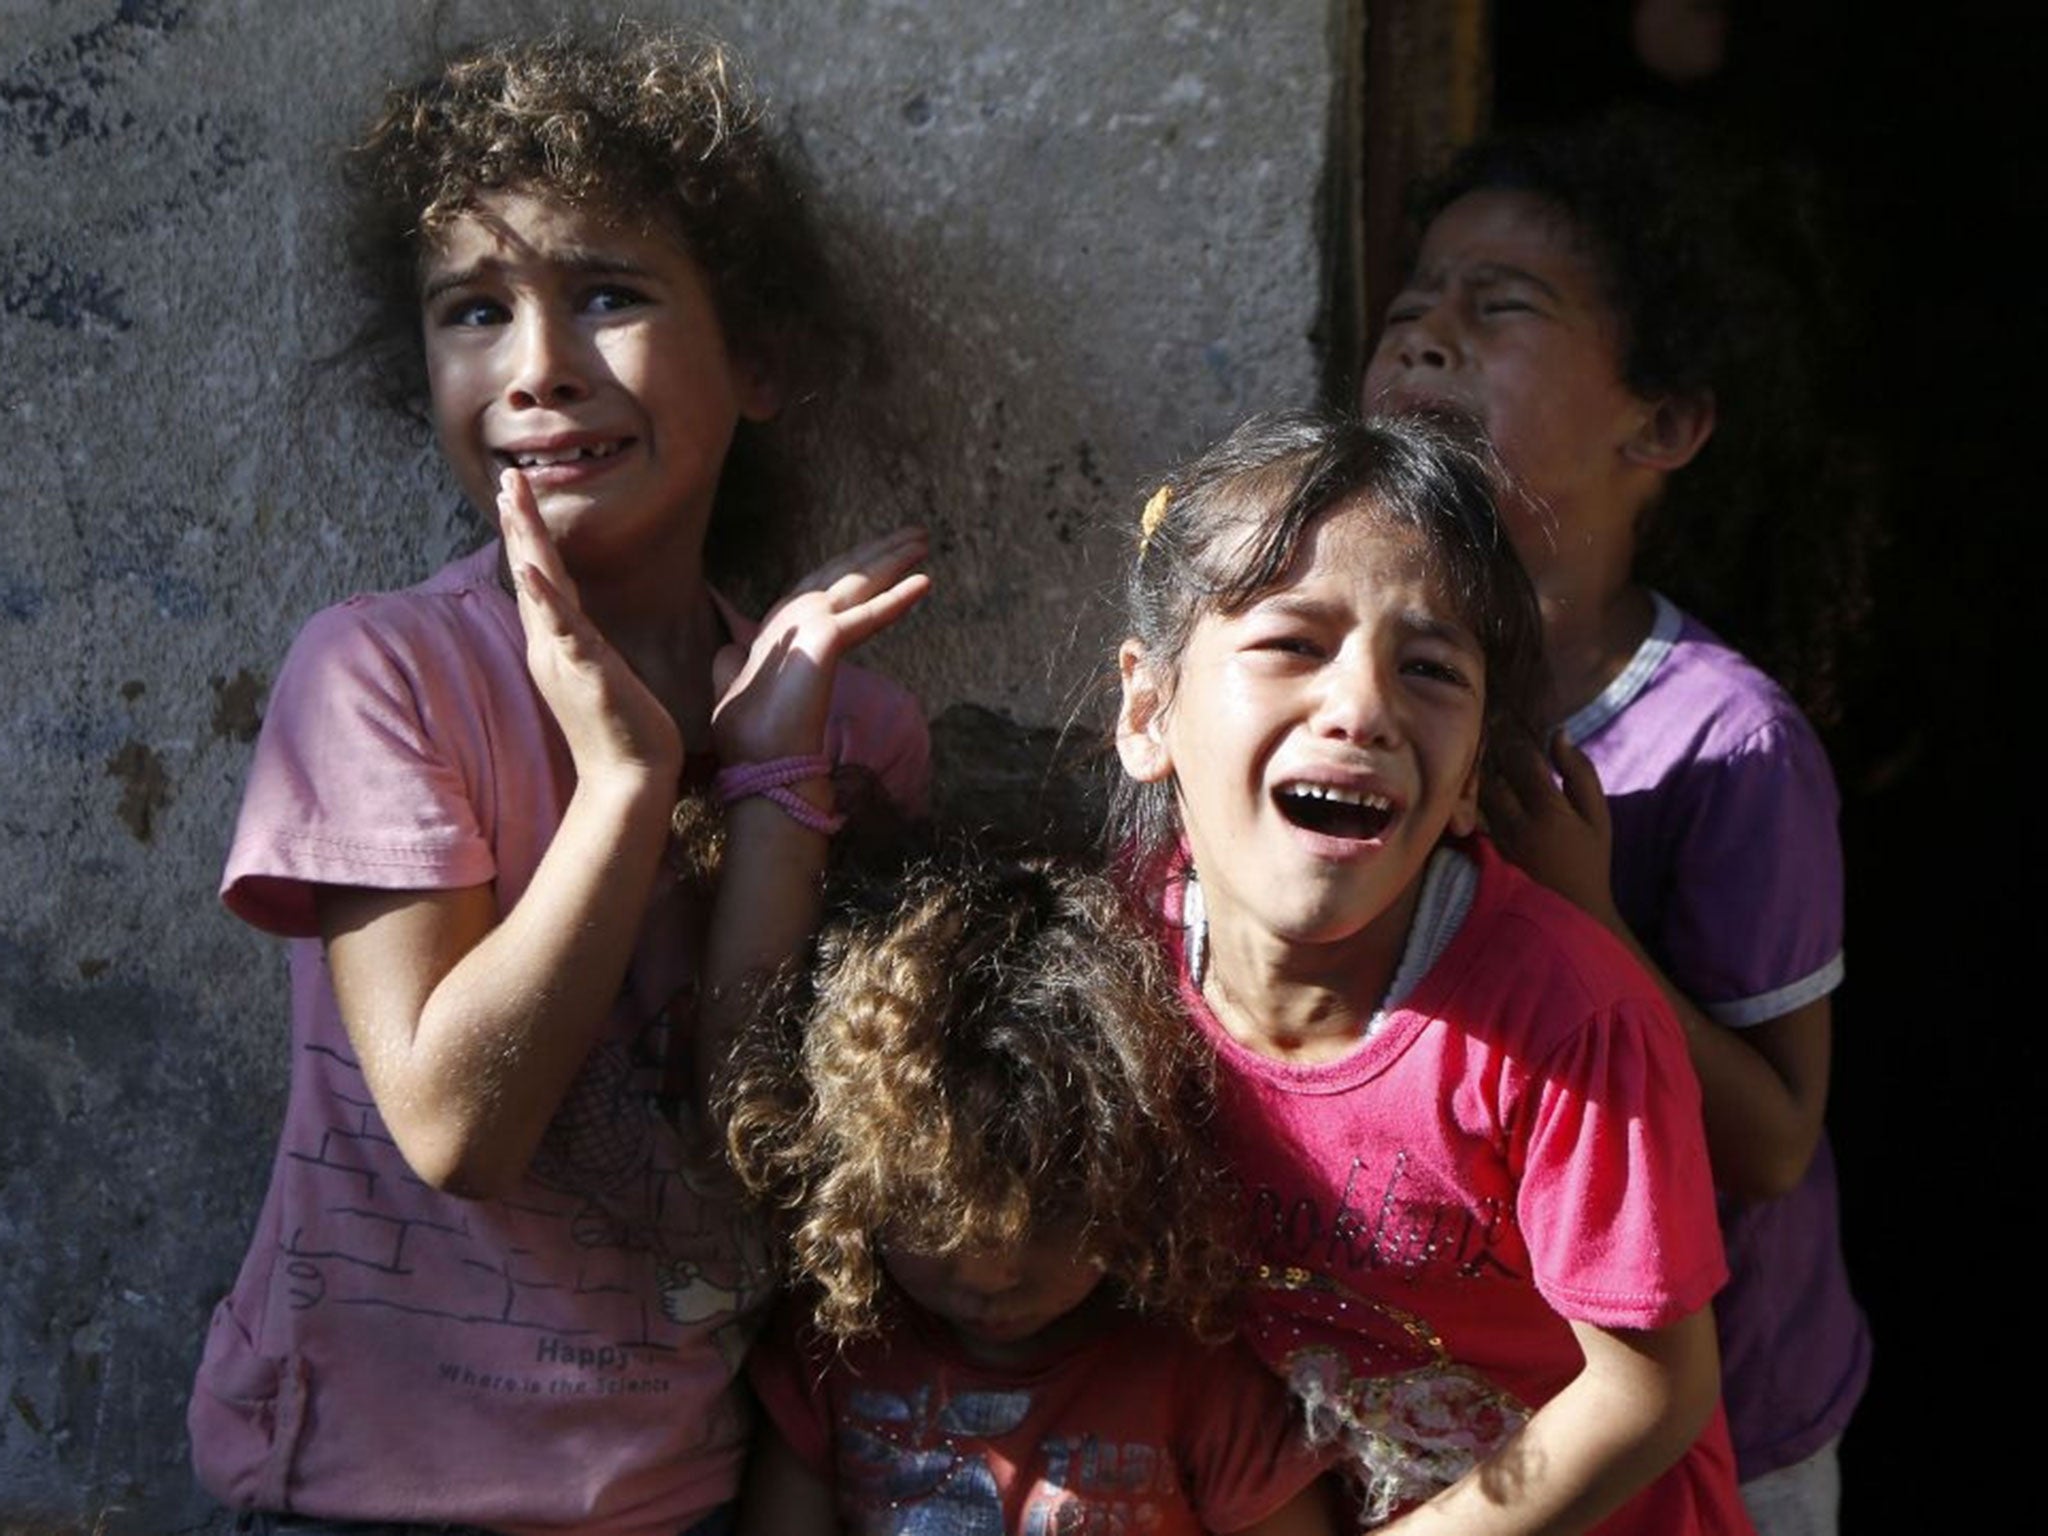 Young relatives of four boys, all from the Bakr family, killed during Israeli shelling, cry during their funeral in Gaza City